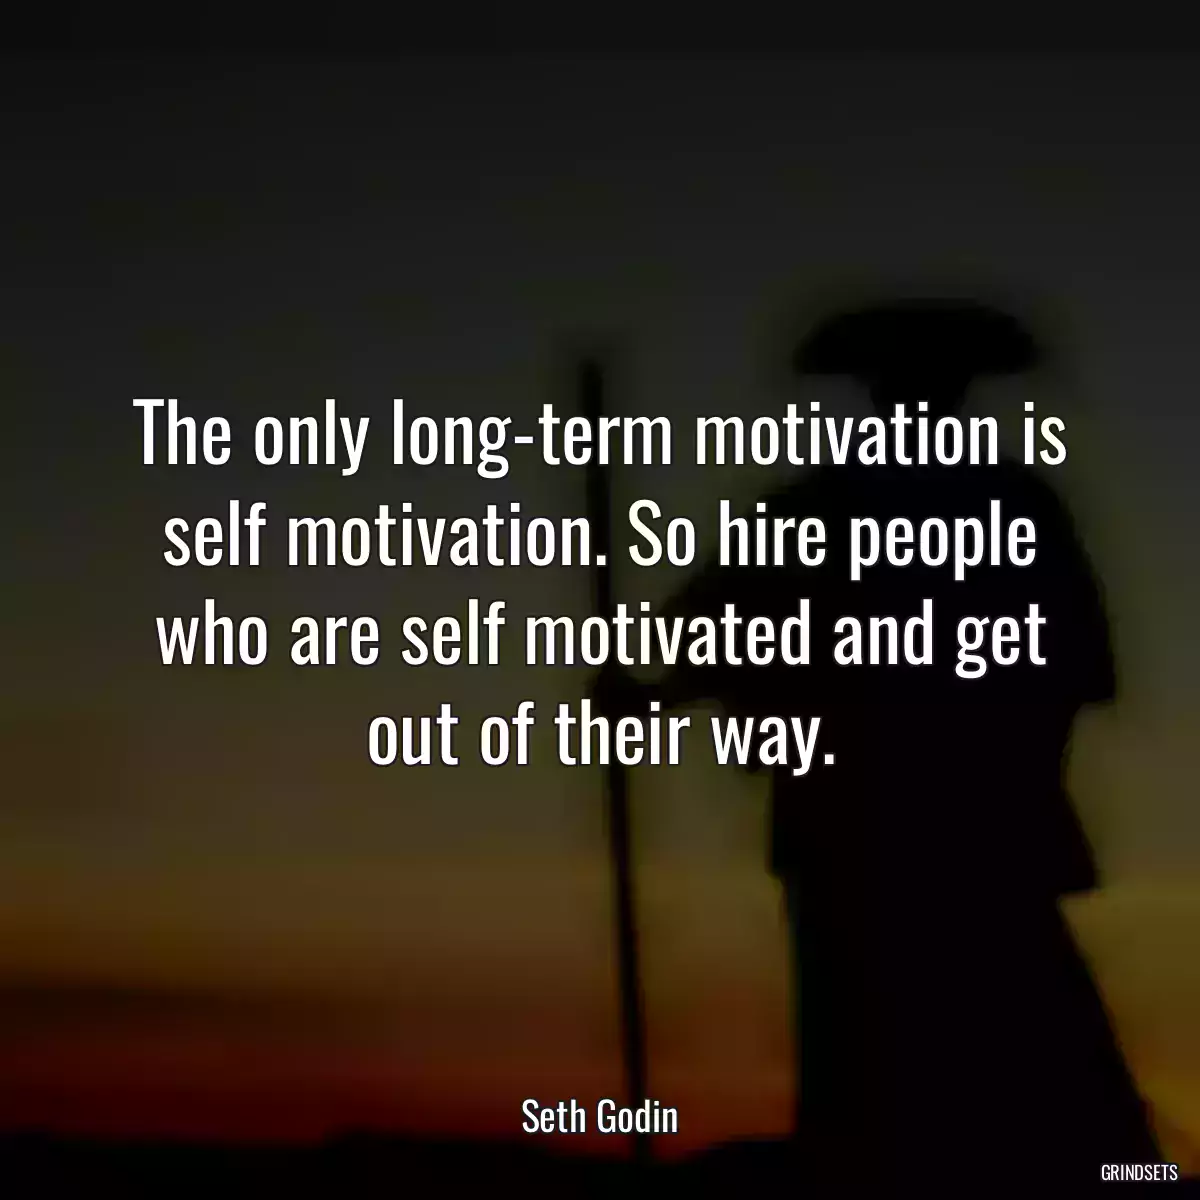 The only long-term motivation is self motivation. So hire people who are self motivated and get out of their way.